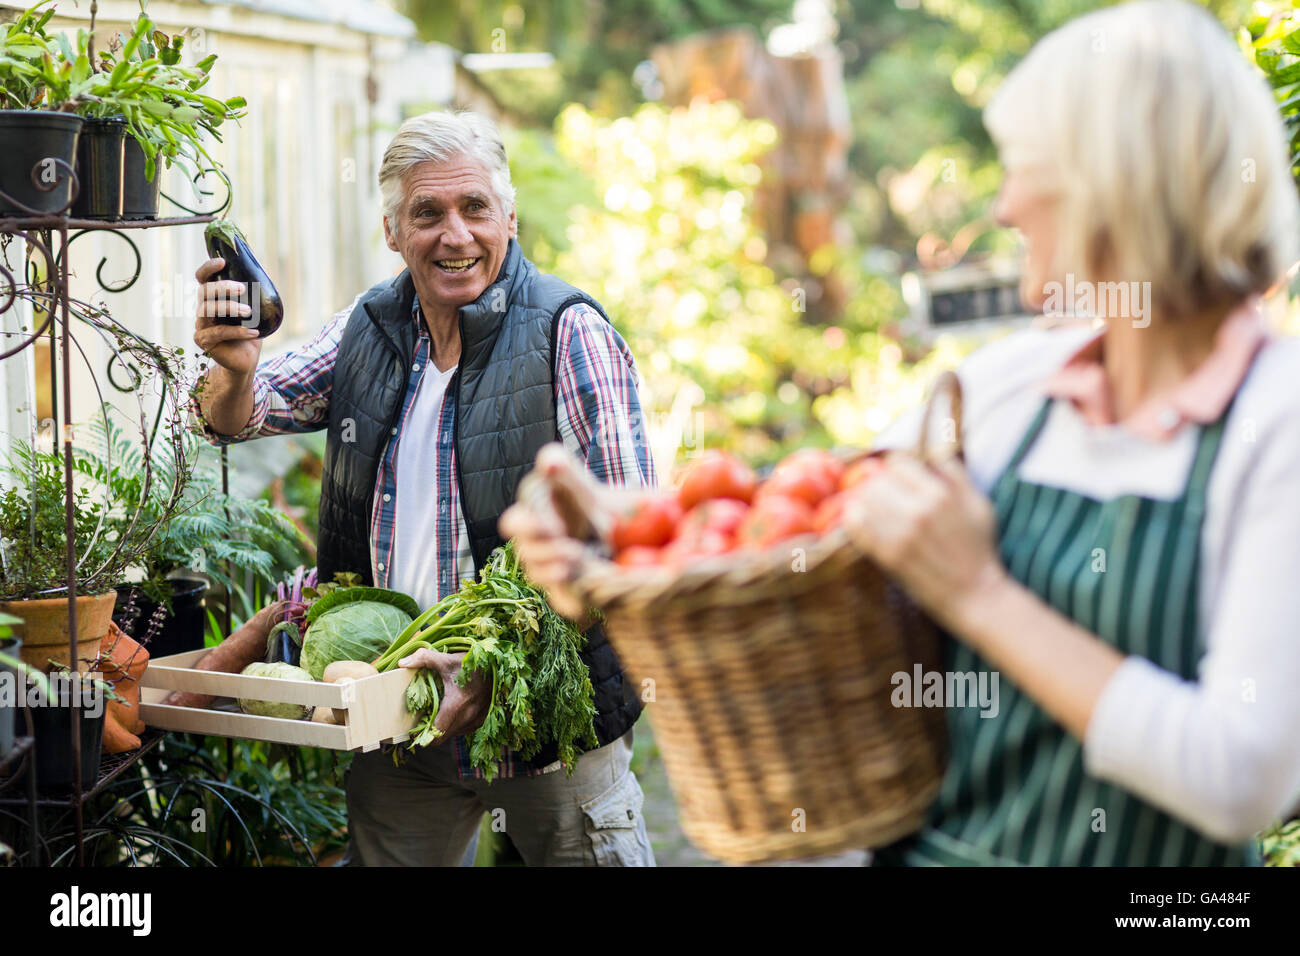 Male gardener with vegetables looking at woman Stock Photo